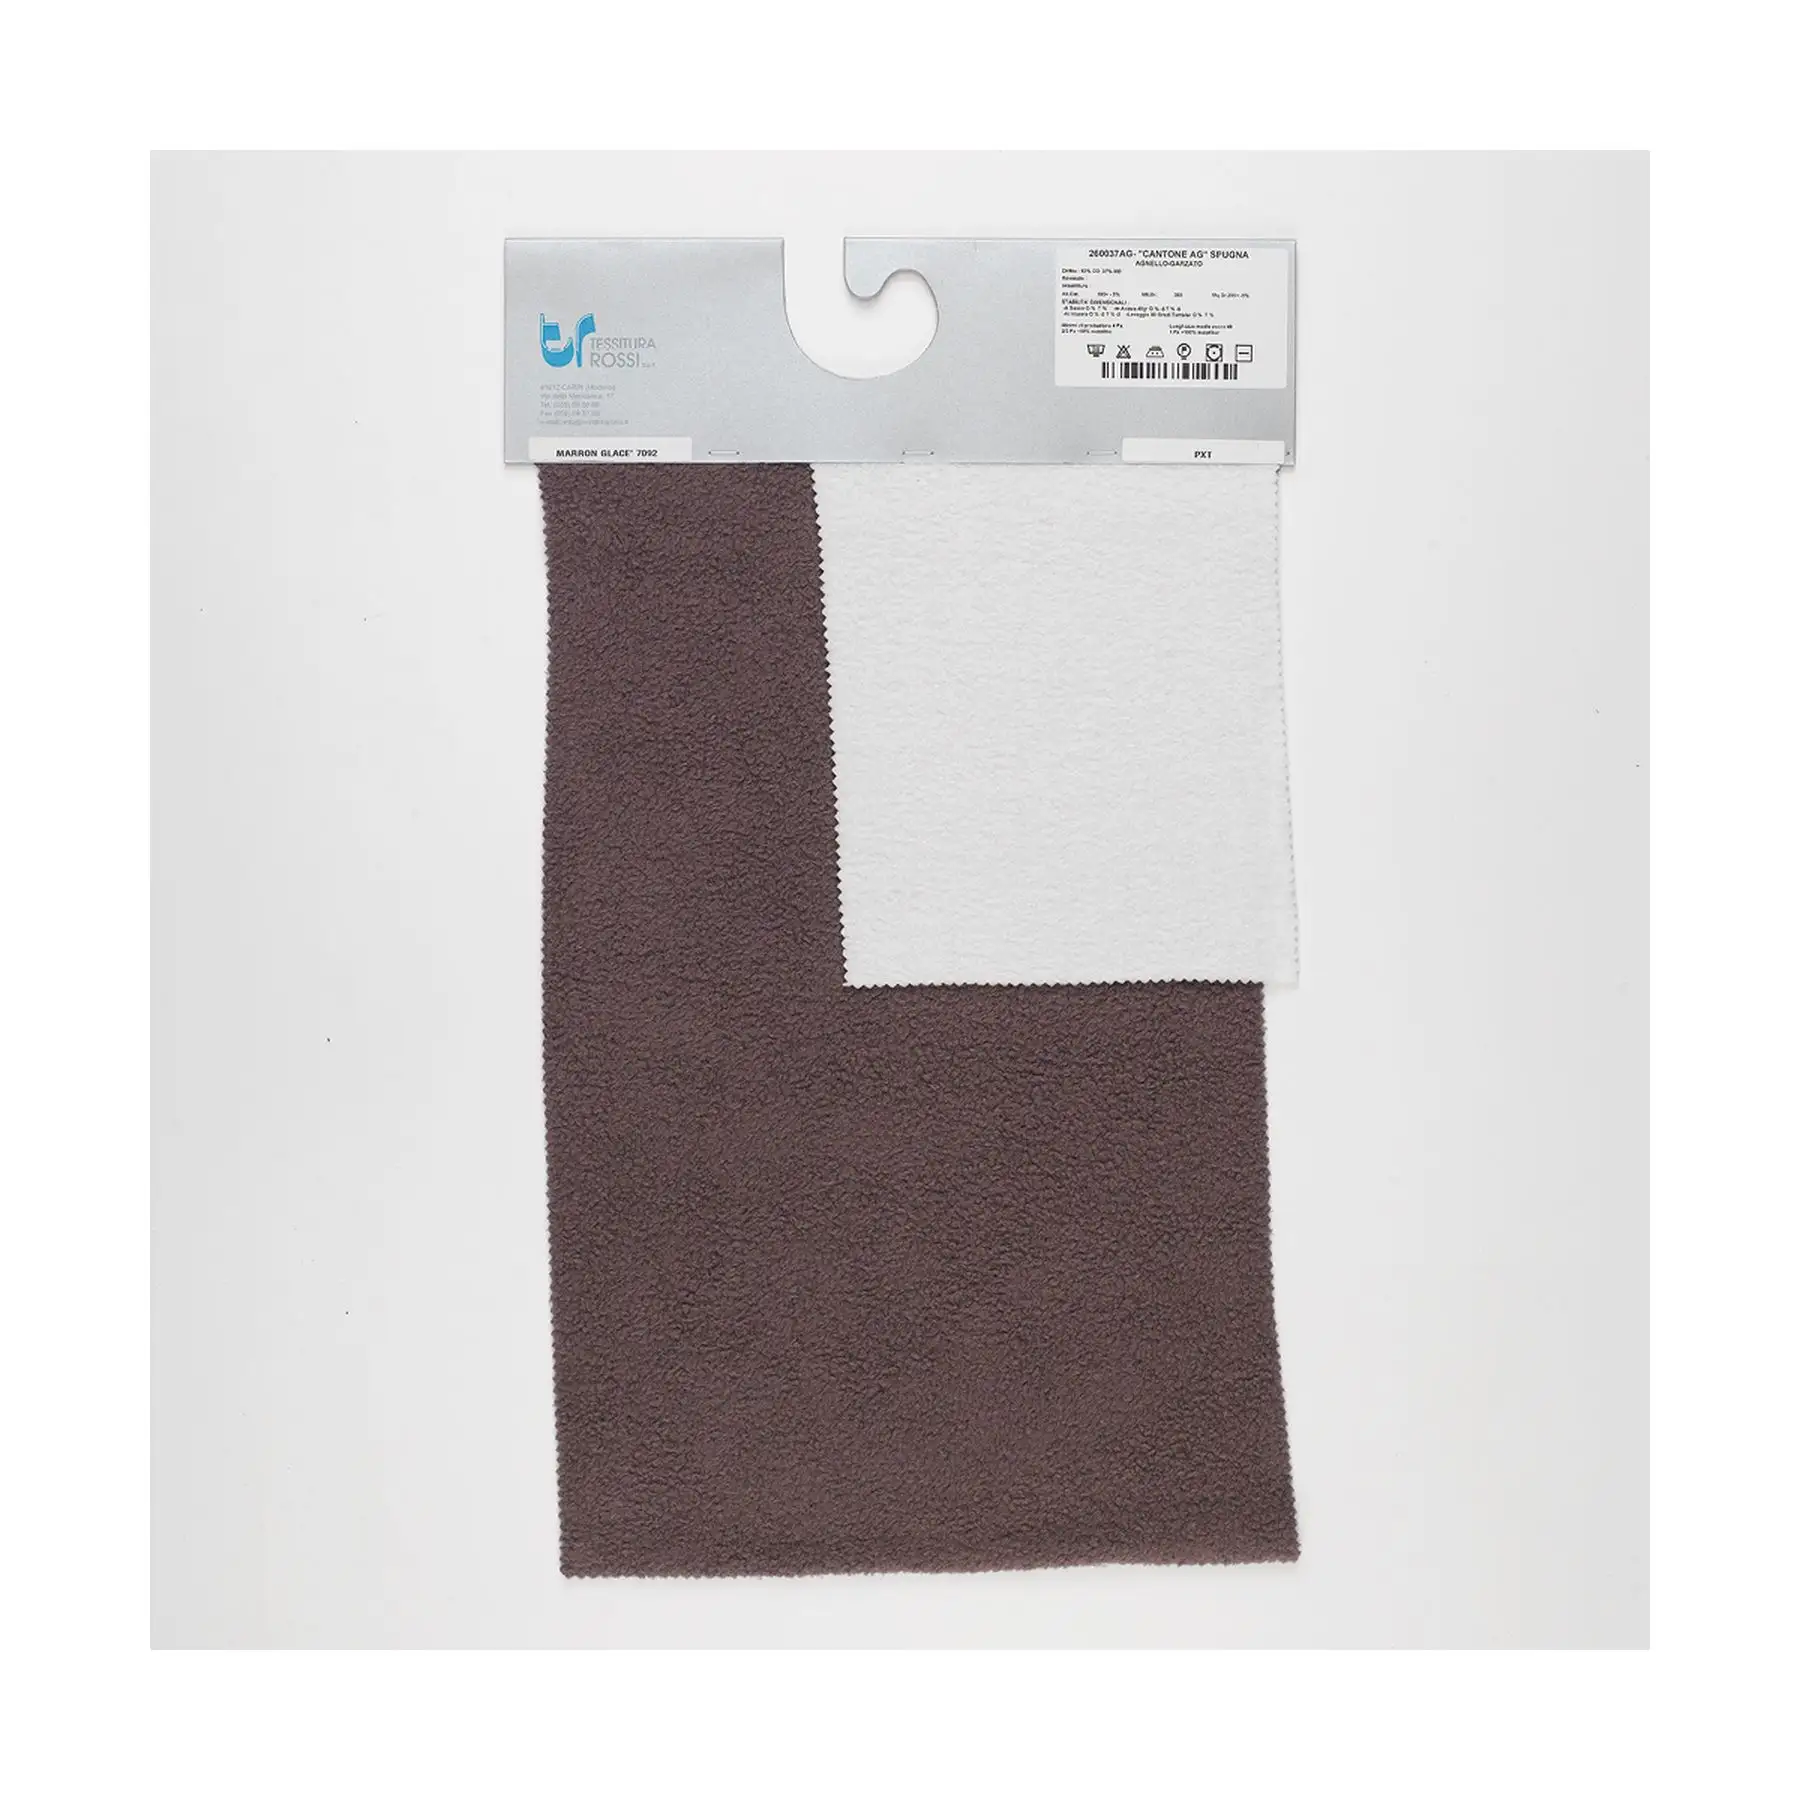 Luxurious Ultra-Soft Cotton Modal Brushed Fleece - Ultimate Warm Comfort For Deluxe Baby Apparel - Softness Like Never Before